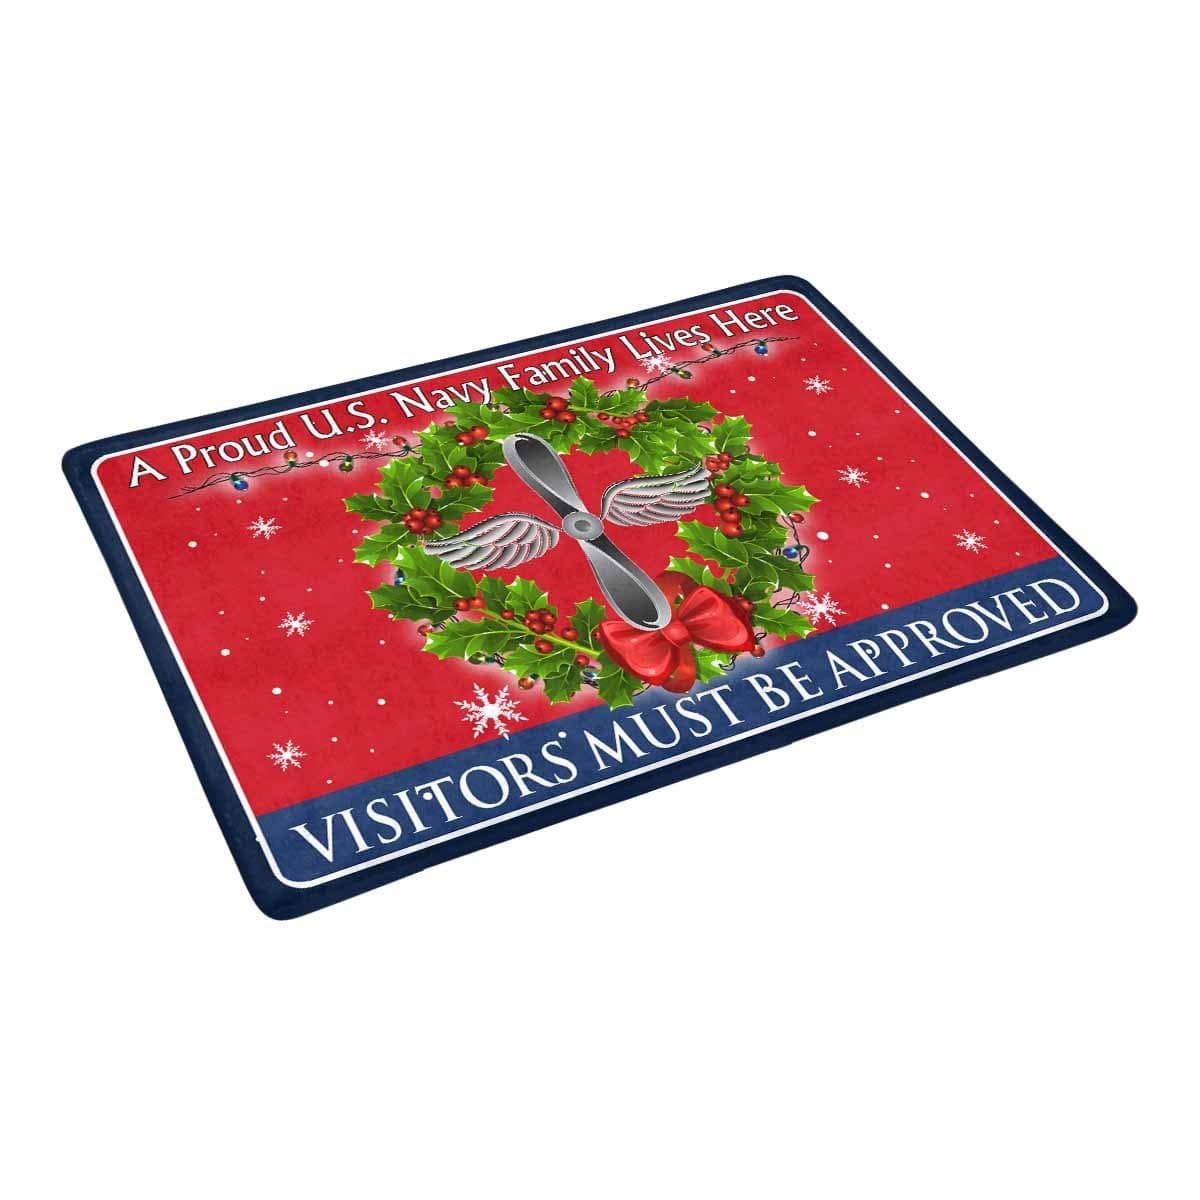 U.S Navy Aviation machinist's mate Navy AD - Visitors must be approved - Christmas Doormat-Doormat-Navy-Rate-Veterans Nation